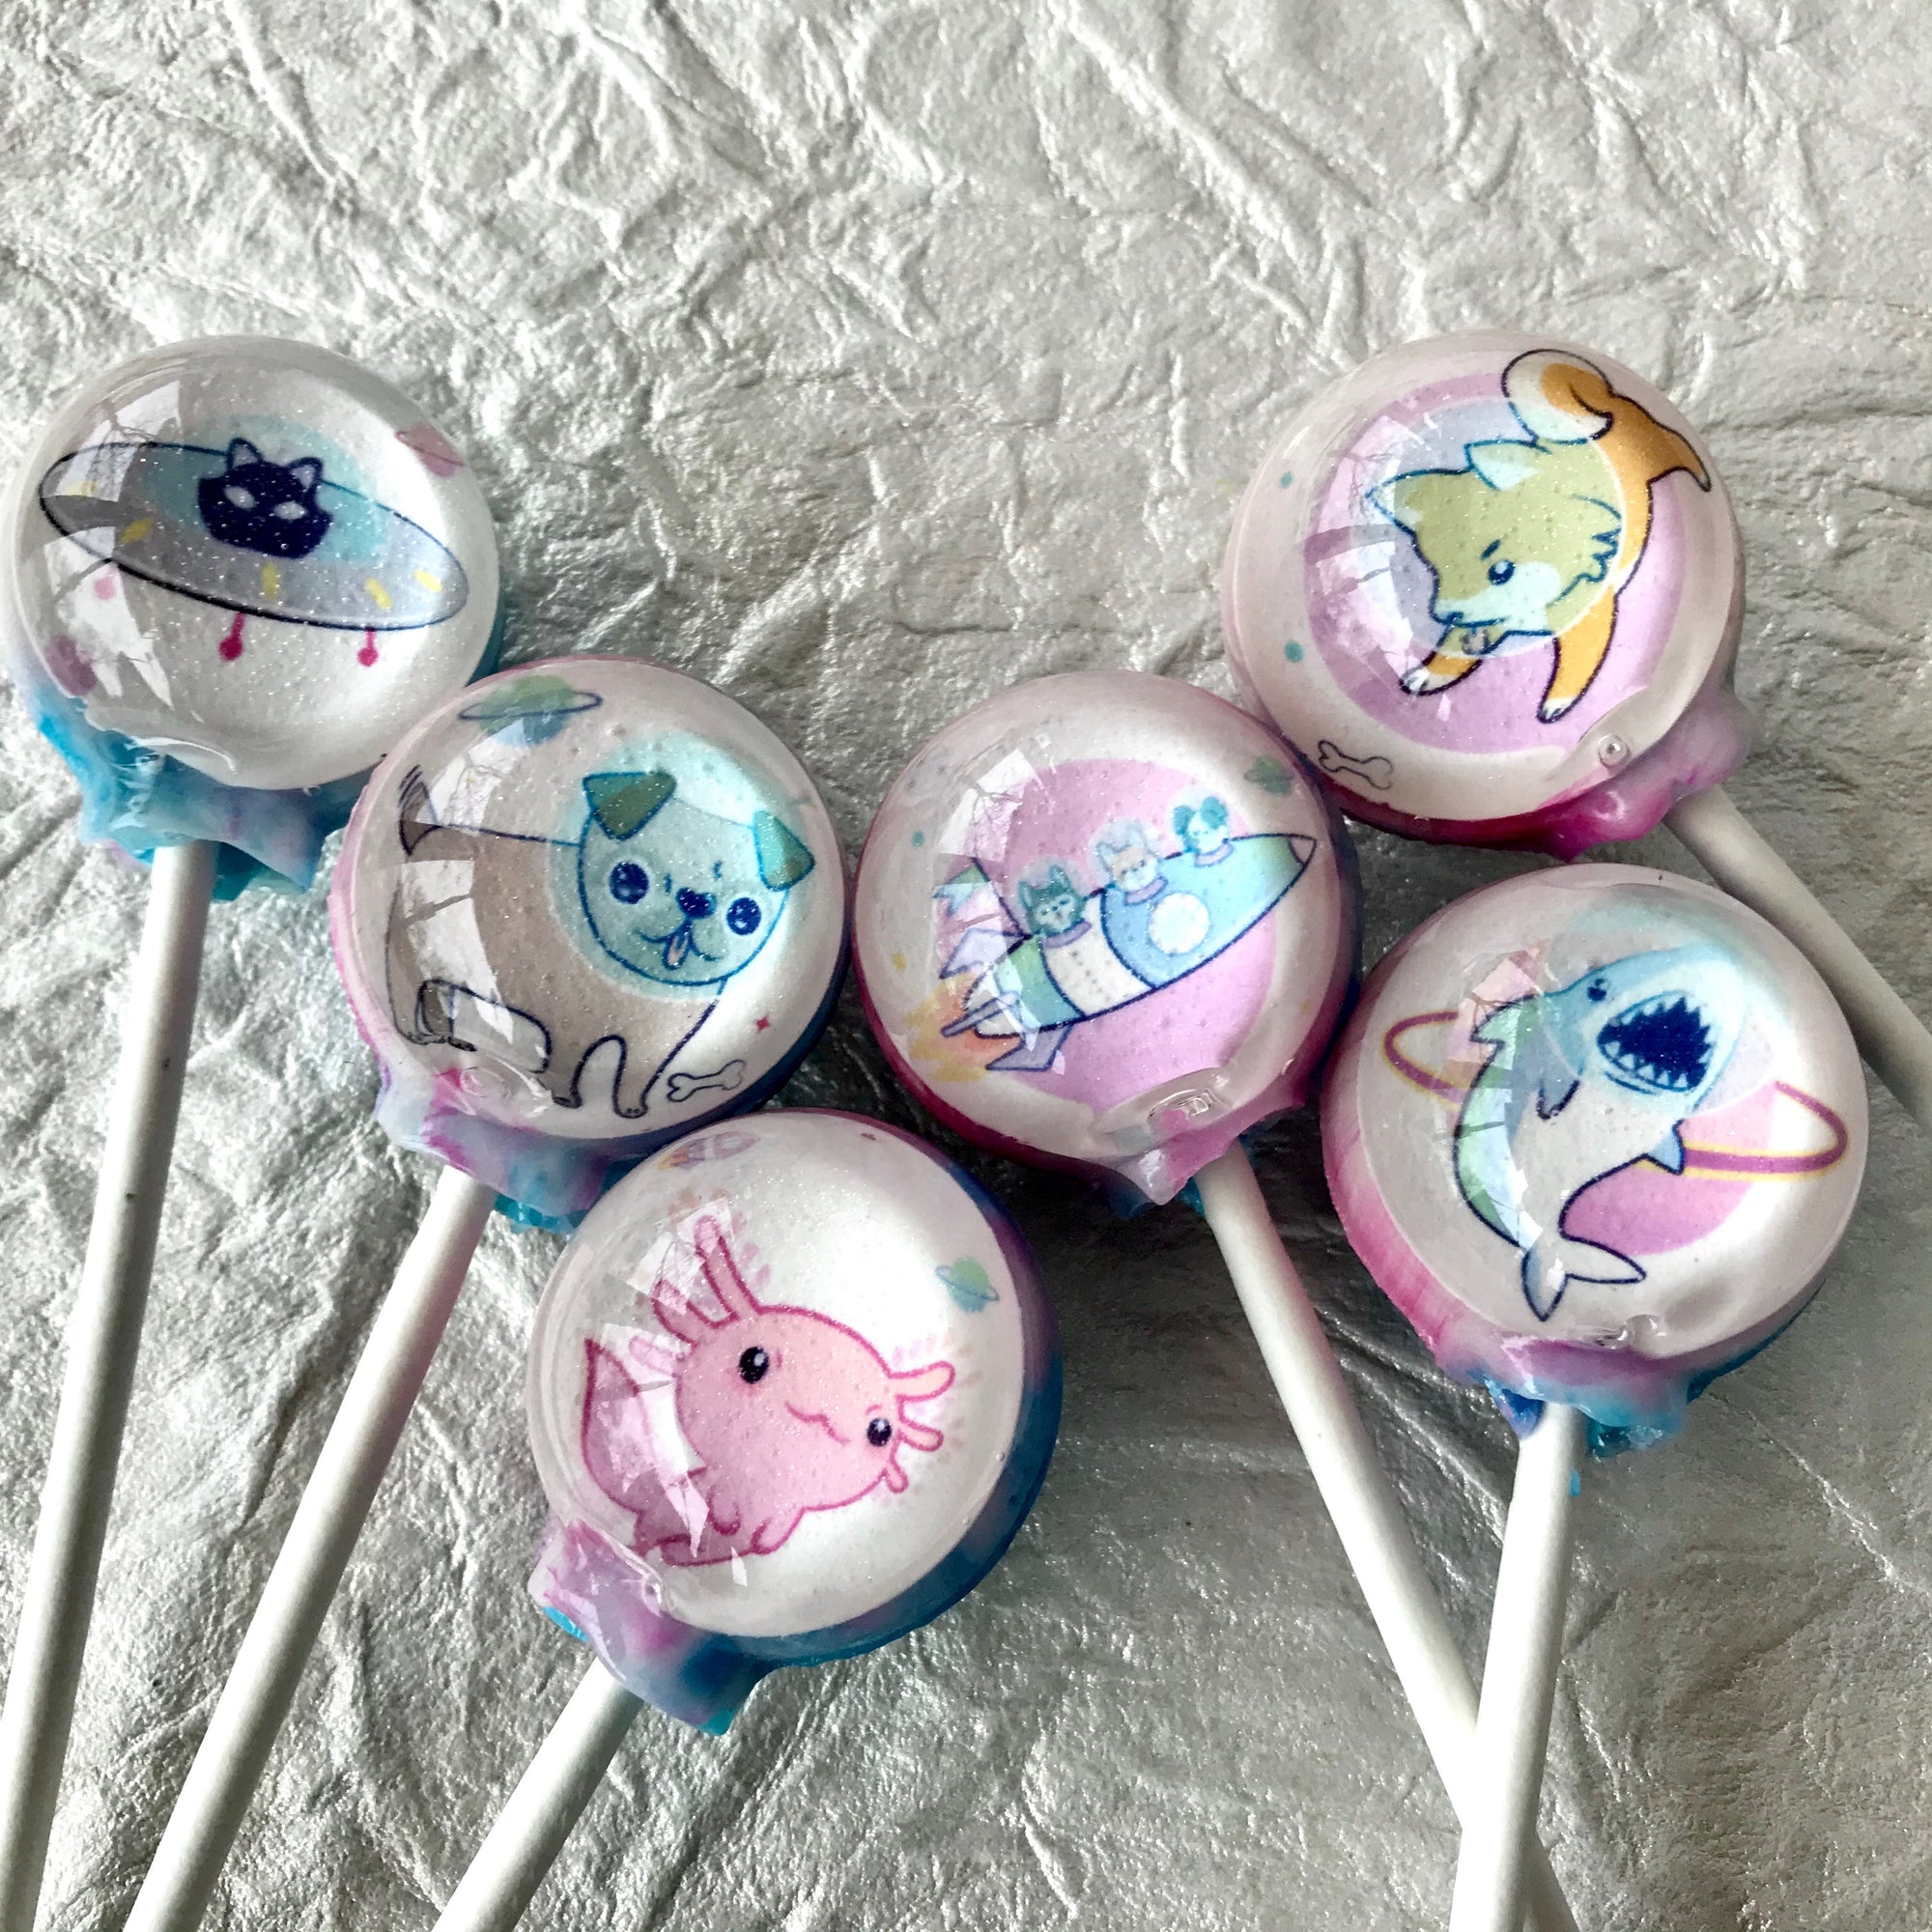 Galaxy of Critter Lollipops 5 or 6-piece set by I Want Candy!